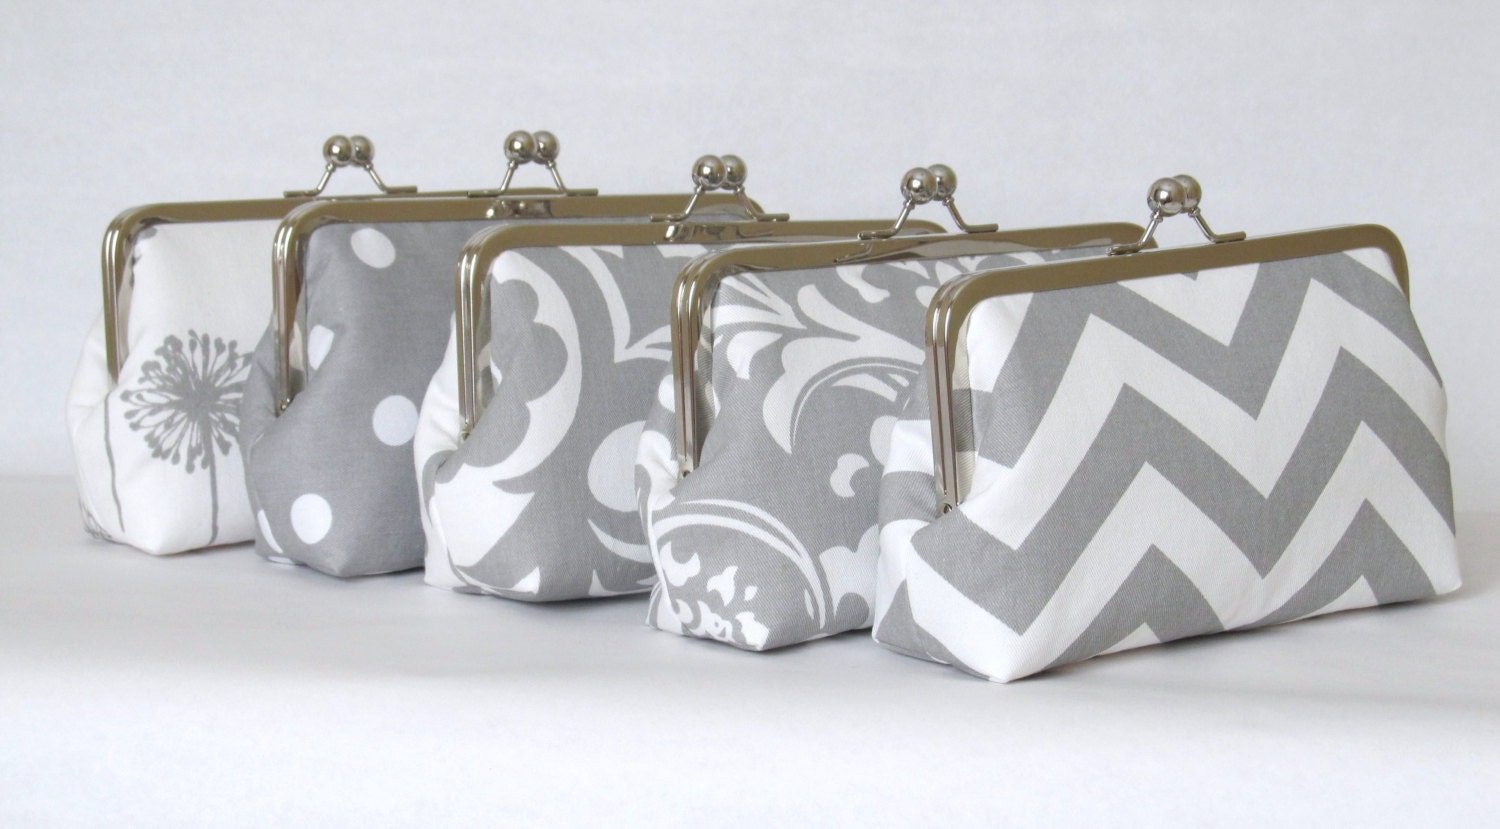 SALE 20% OFF 5 Premier Print Bridesmaid Clutches,Grey And White Custom Clutches,Bridal Accessories,Bridesmaid Gifts